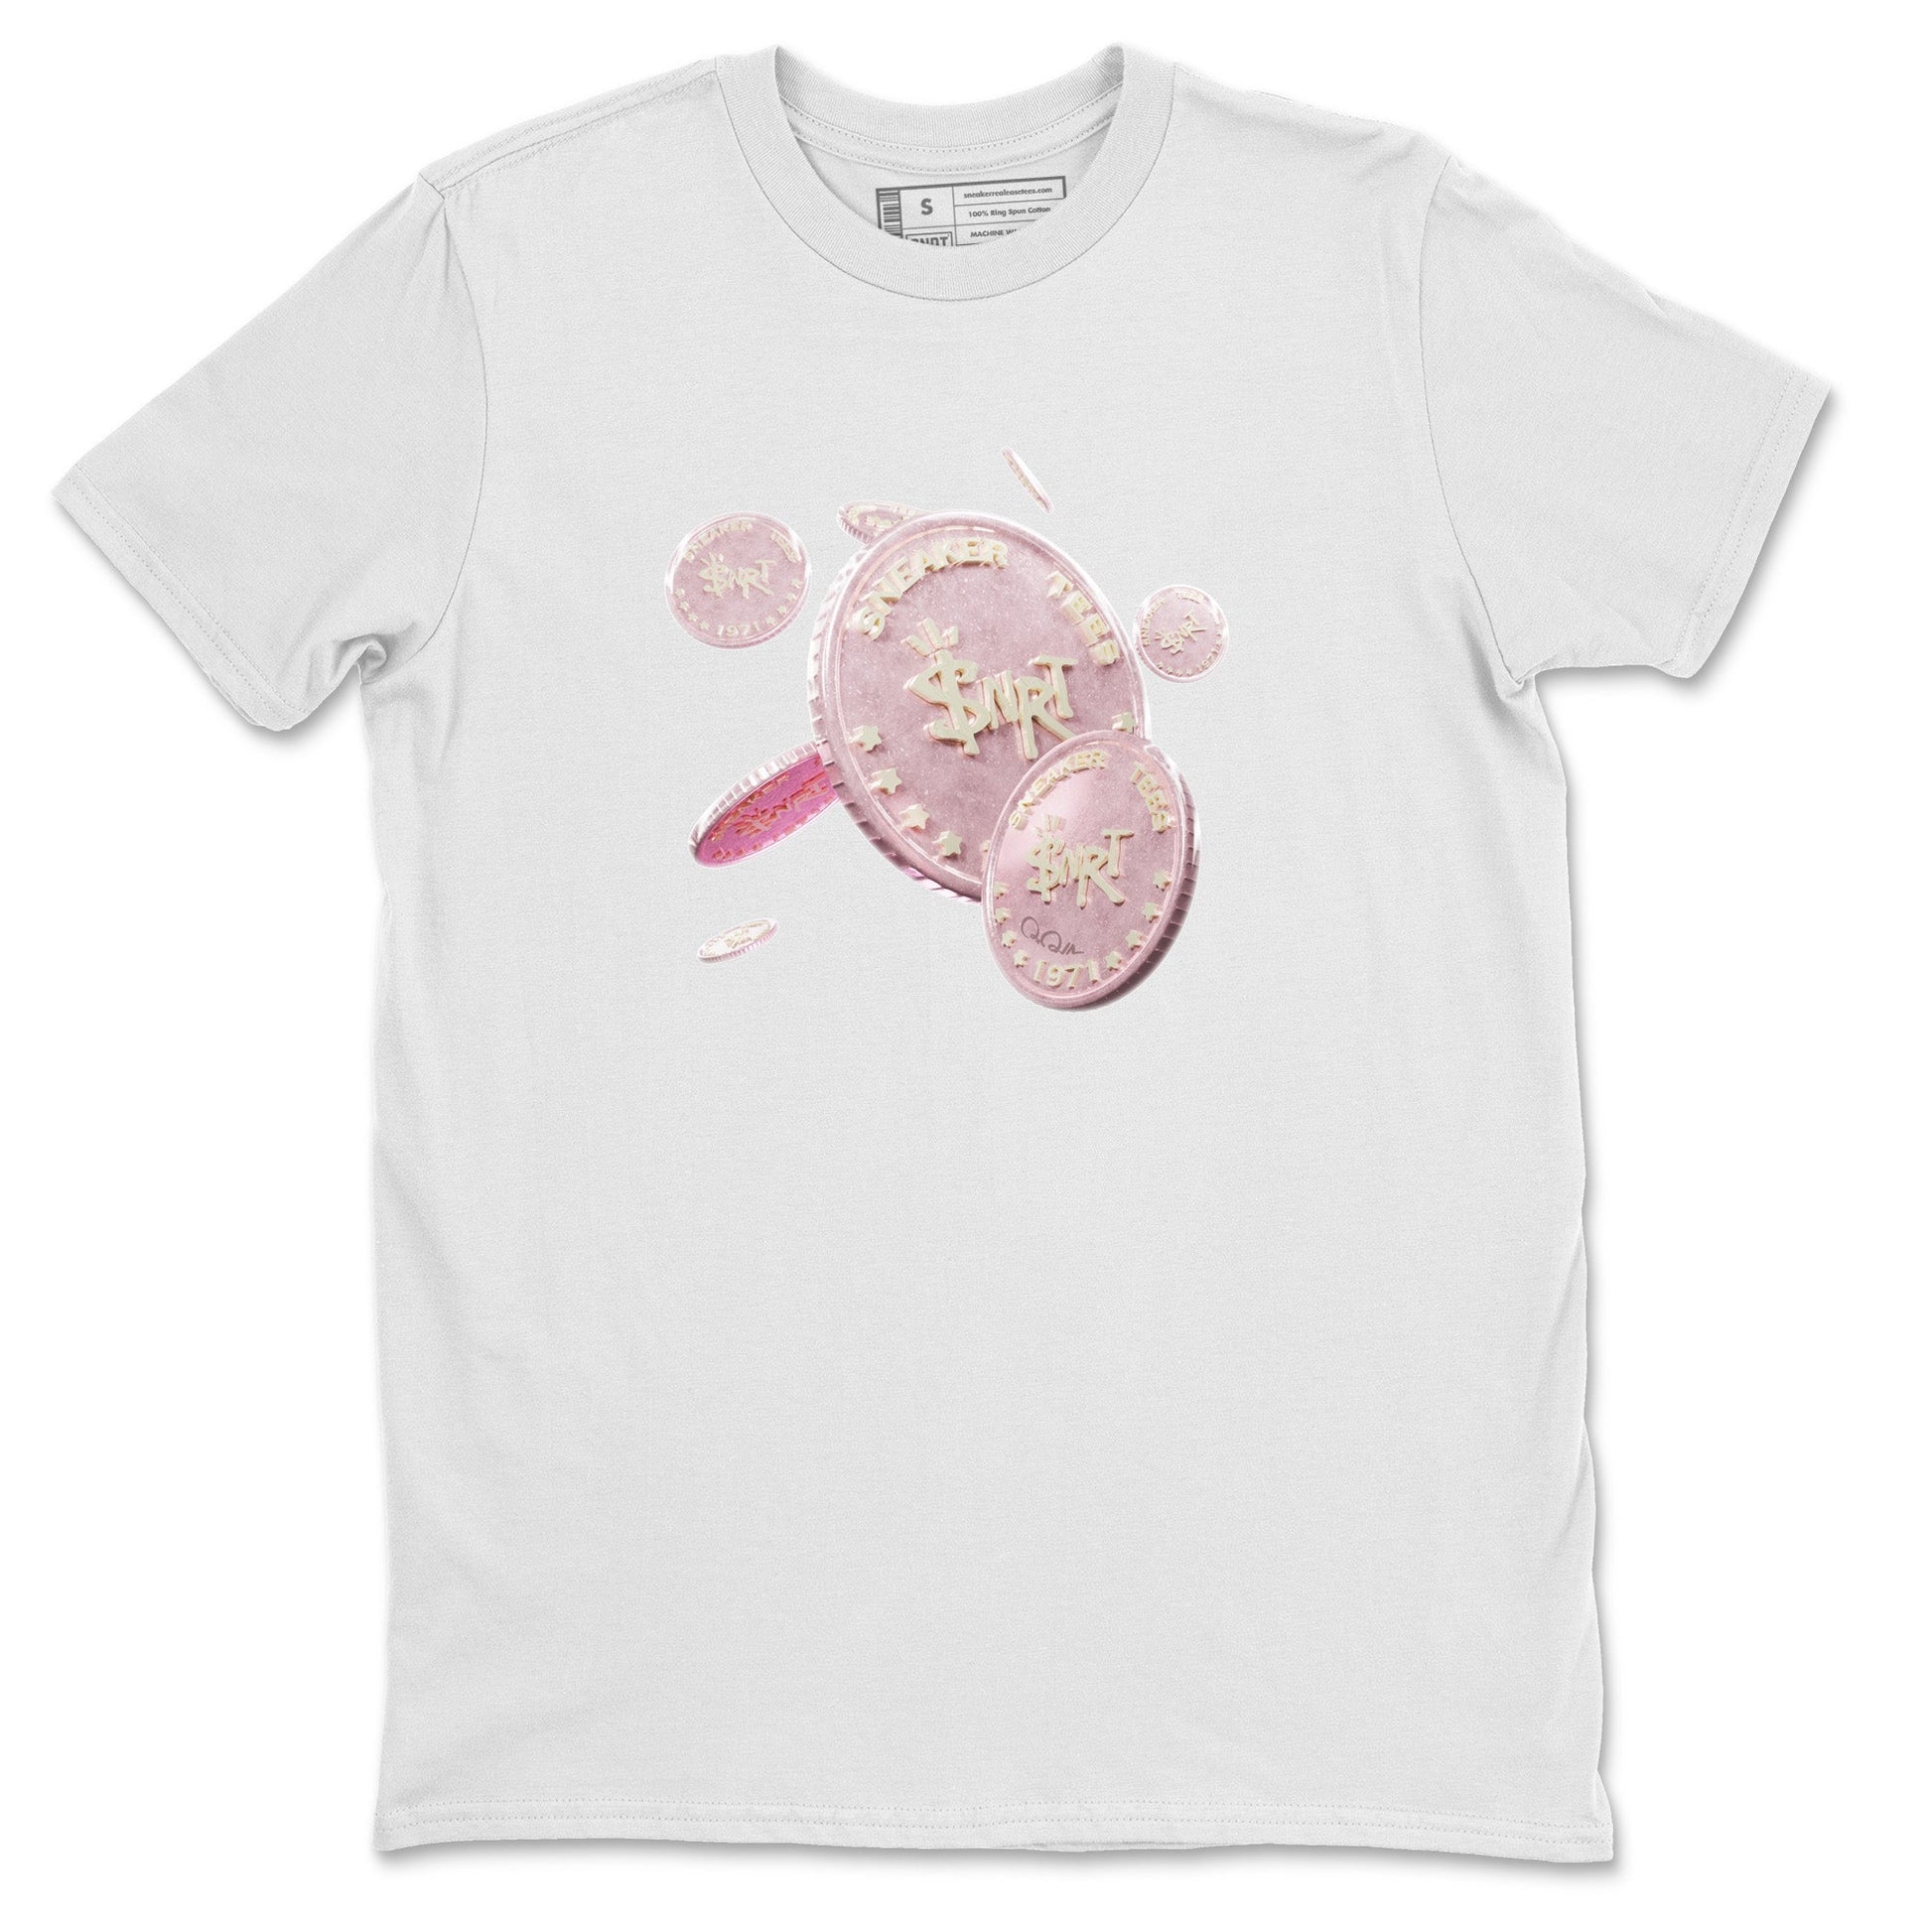 AJ1 Retro High OG Washed Pink Sneaker Match Tees Coin Drop Sneaker Tees AJ1 Retro High OG Washed Pink Sneaker Release Tees Unisex Shirts White 2